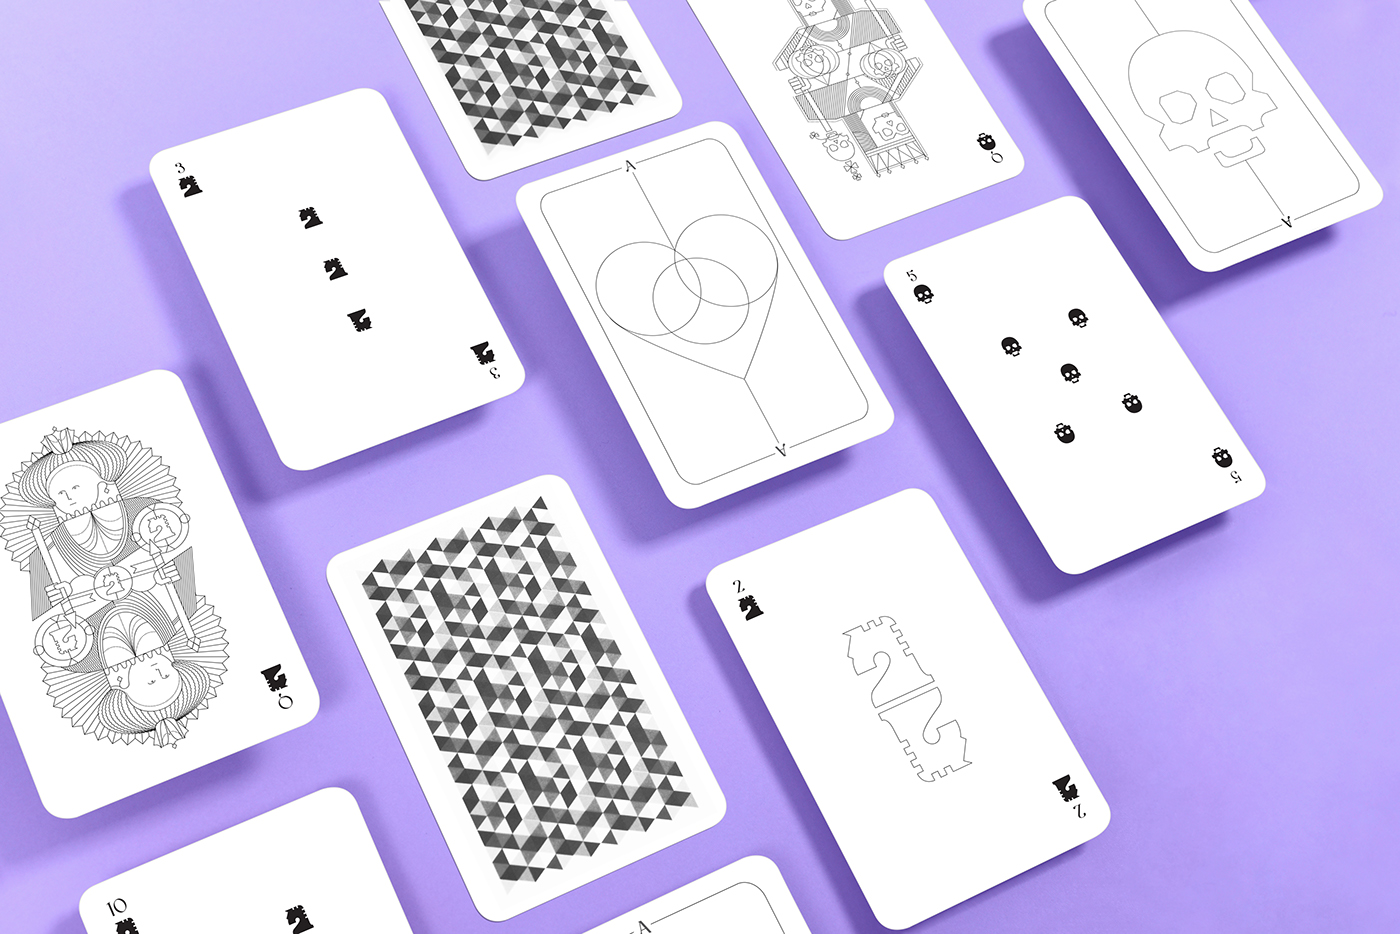 playing card Playing Cards playing arts graphic design  pantone neon minimalist ILLUSTRATION  Packaging packaging design